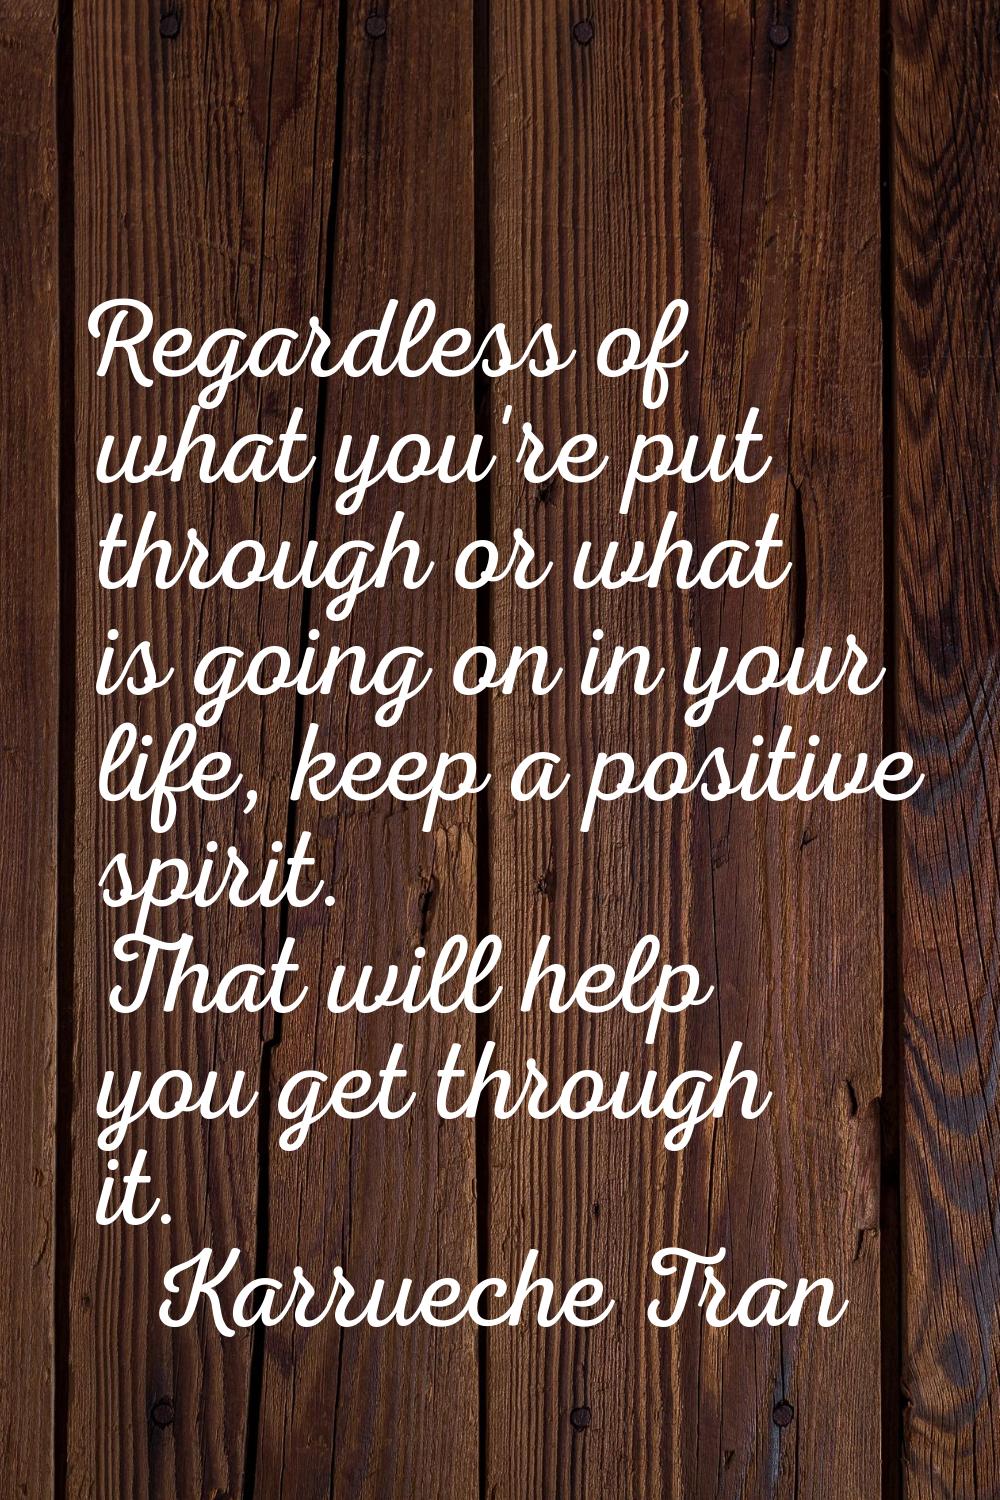 Regardless of what you're put through or what is going on in your life, keep a positive spirit. Tha